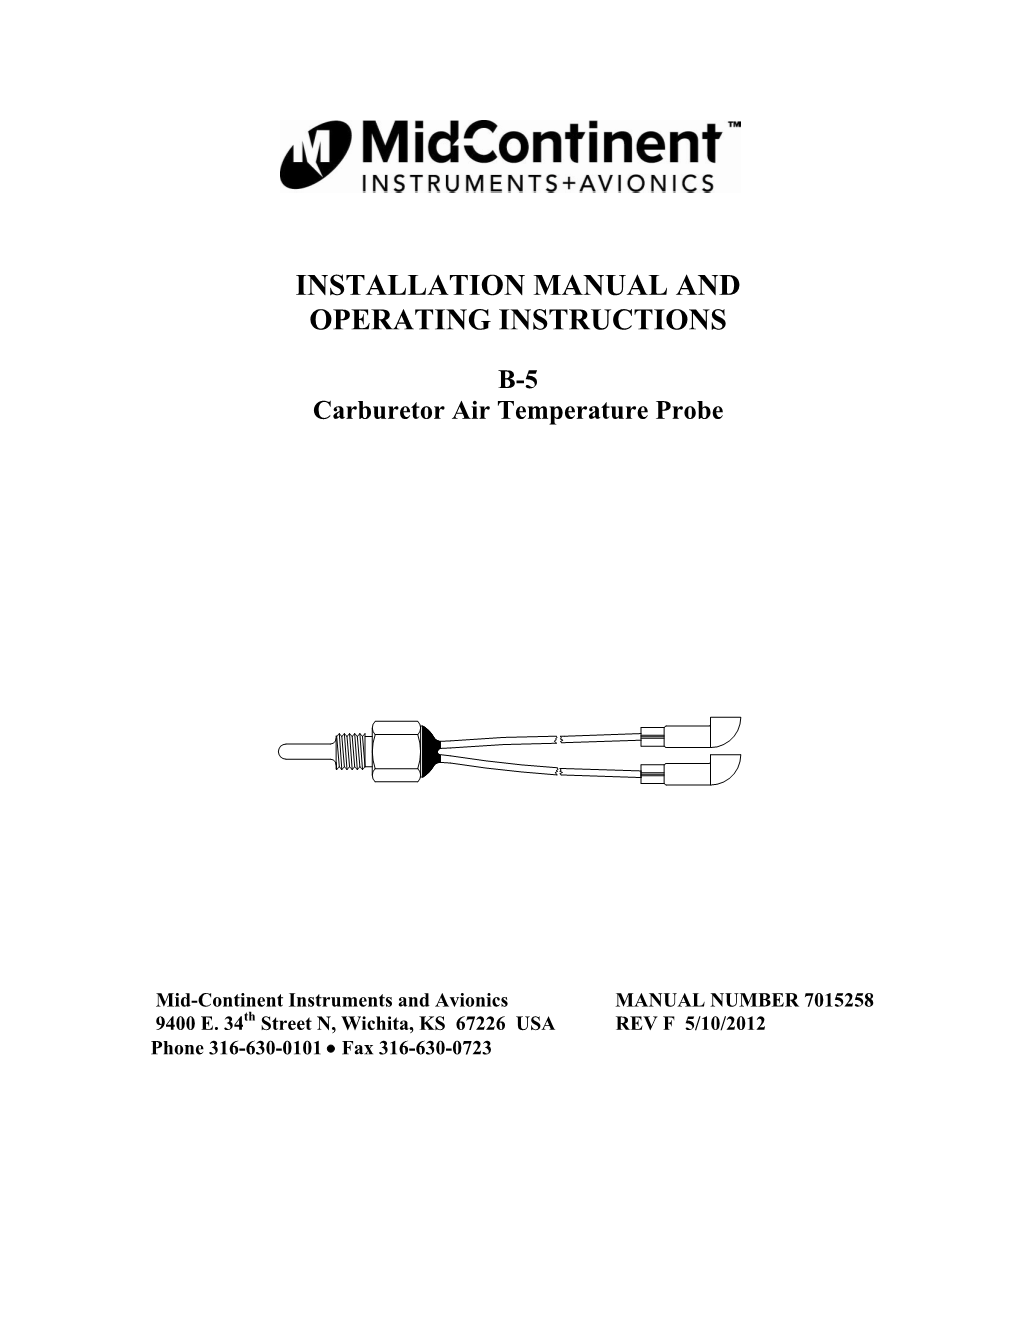 Installation Manual and Operating Instructions B-5